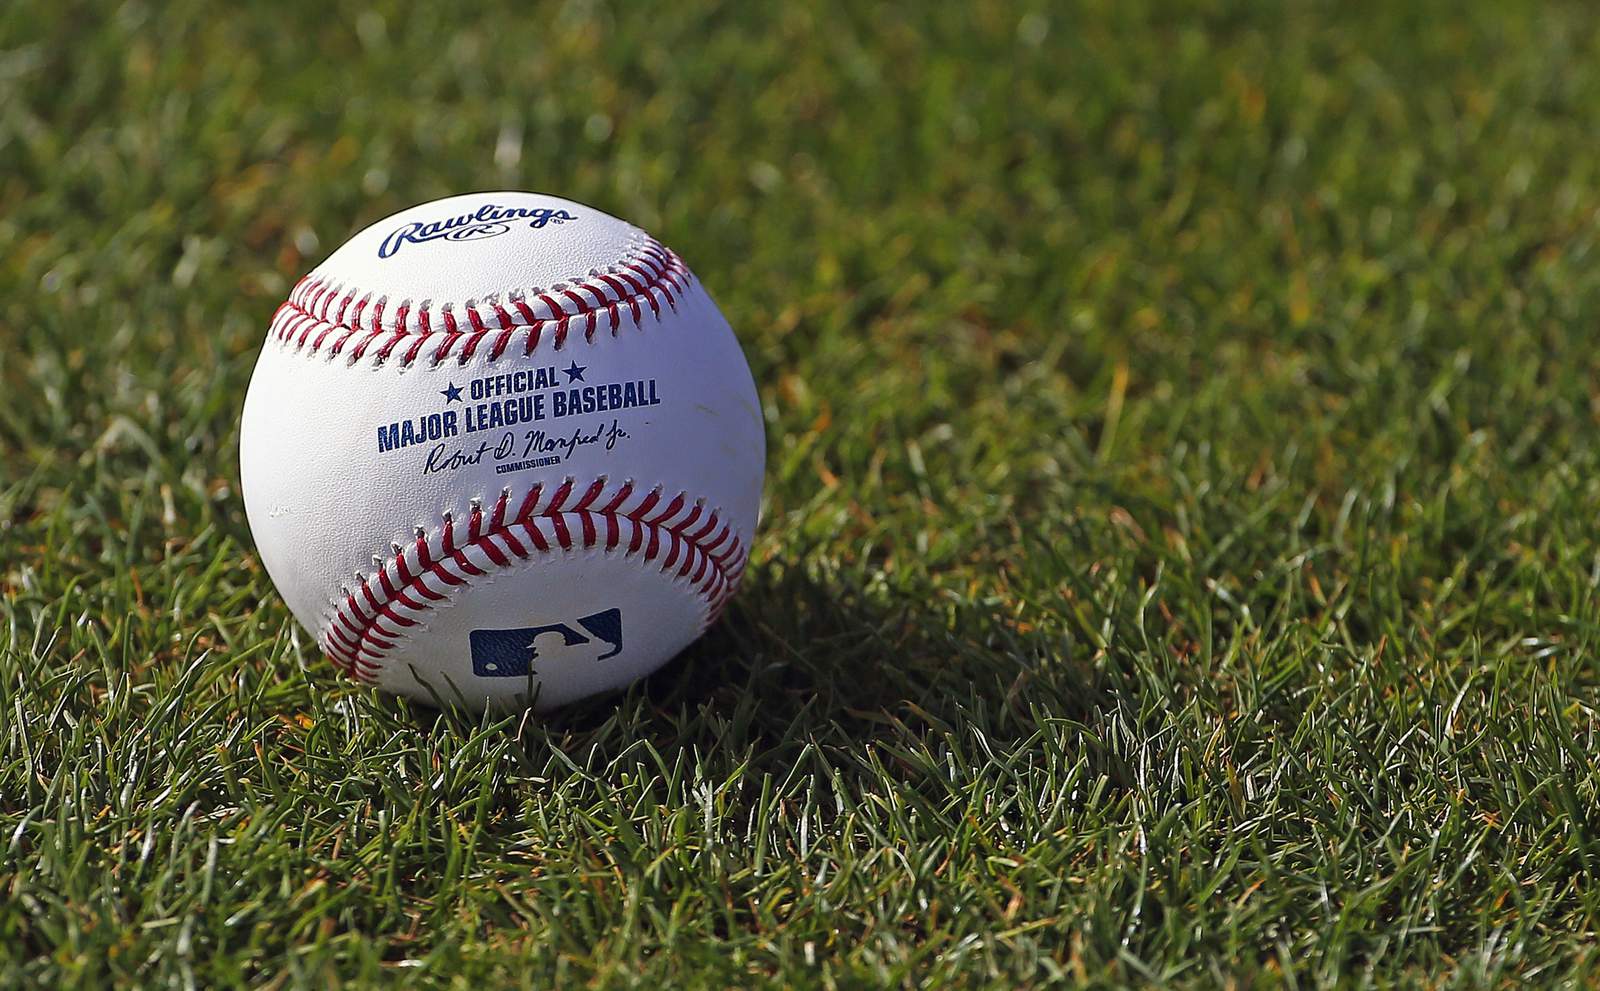 Several MLB players and team staff test positive for Covid-19, per report